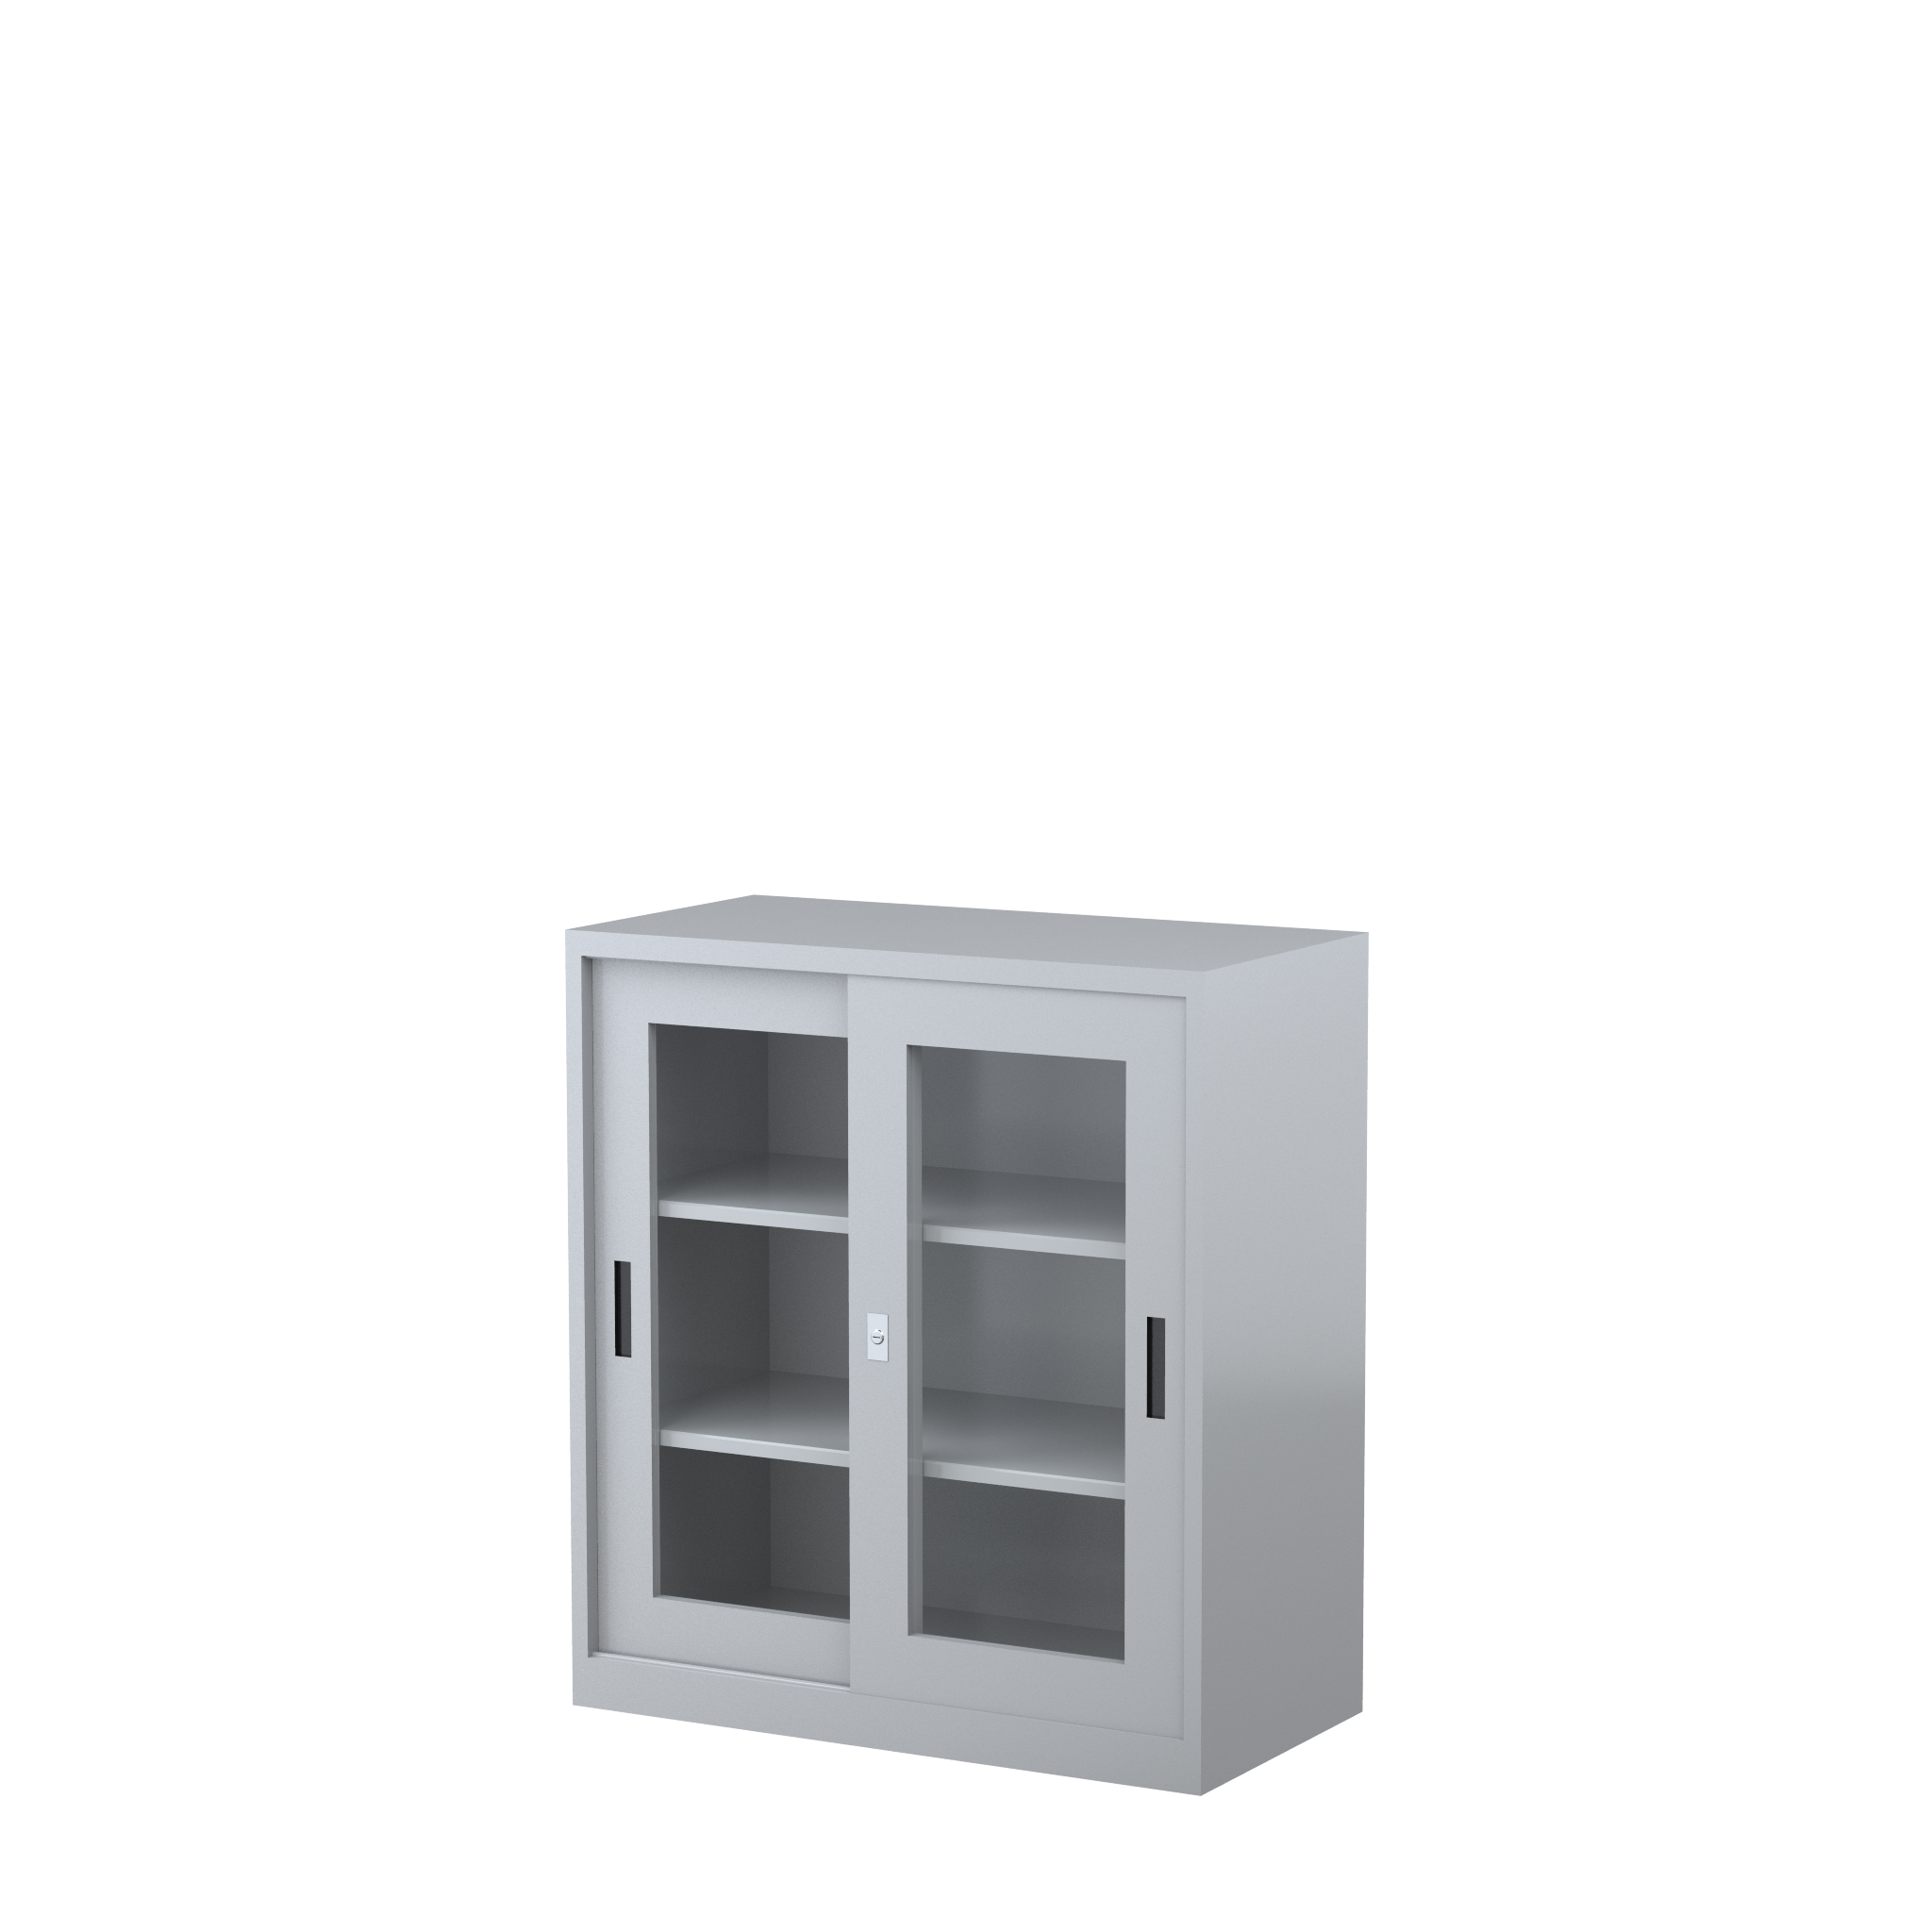 GD1015_914 - STEELCO SG Cabinet 1015H x 914W x 465D - 2 Shelves-SG.png